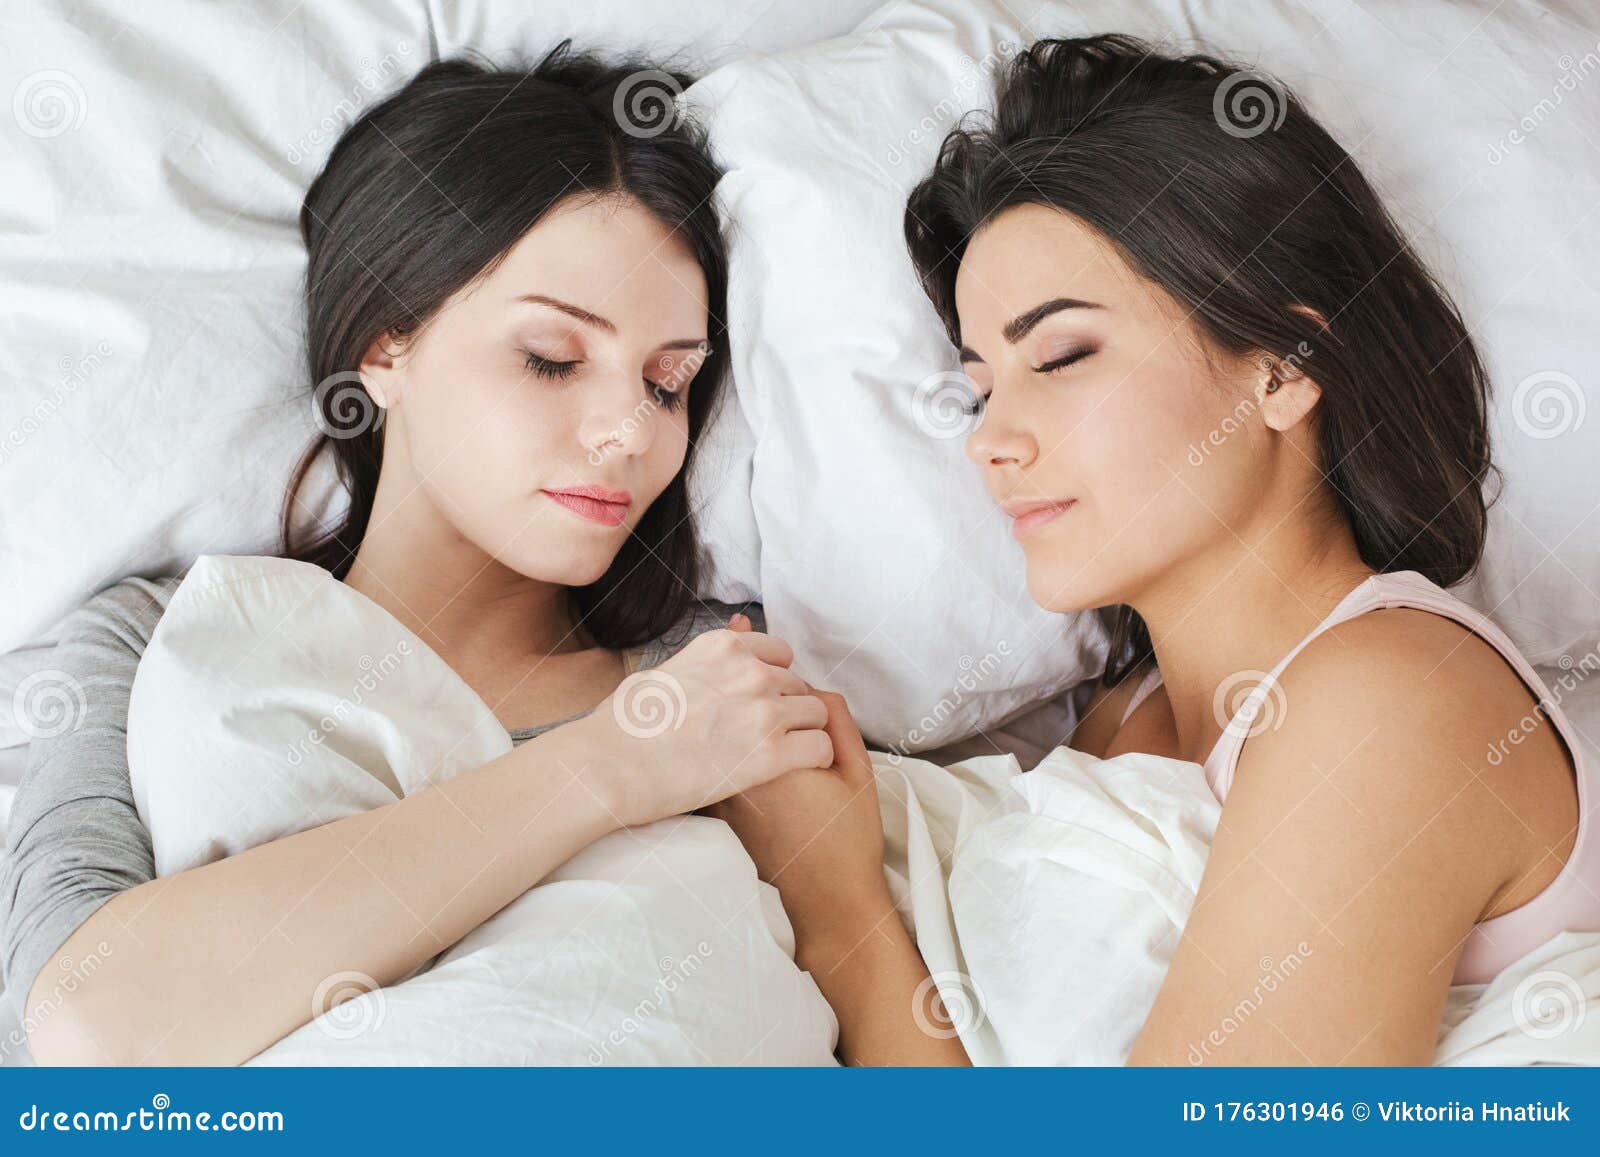 Lesbian Couple In Bedroom At Home Lying Under Blanket Holding Hands